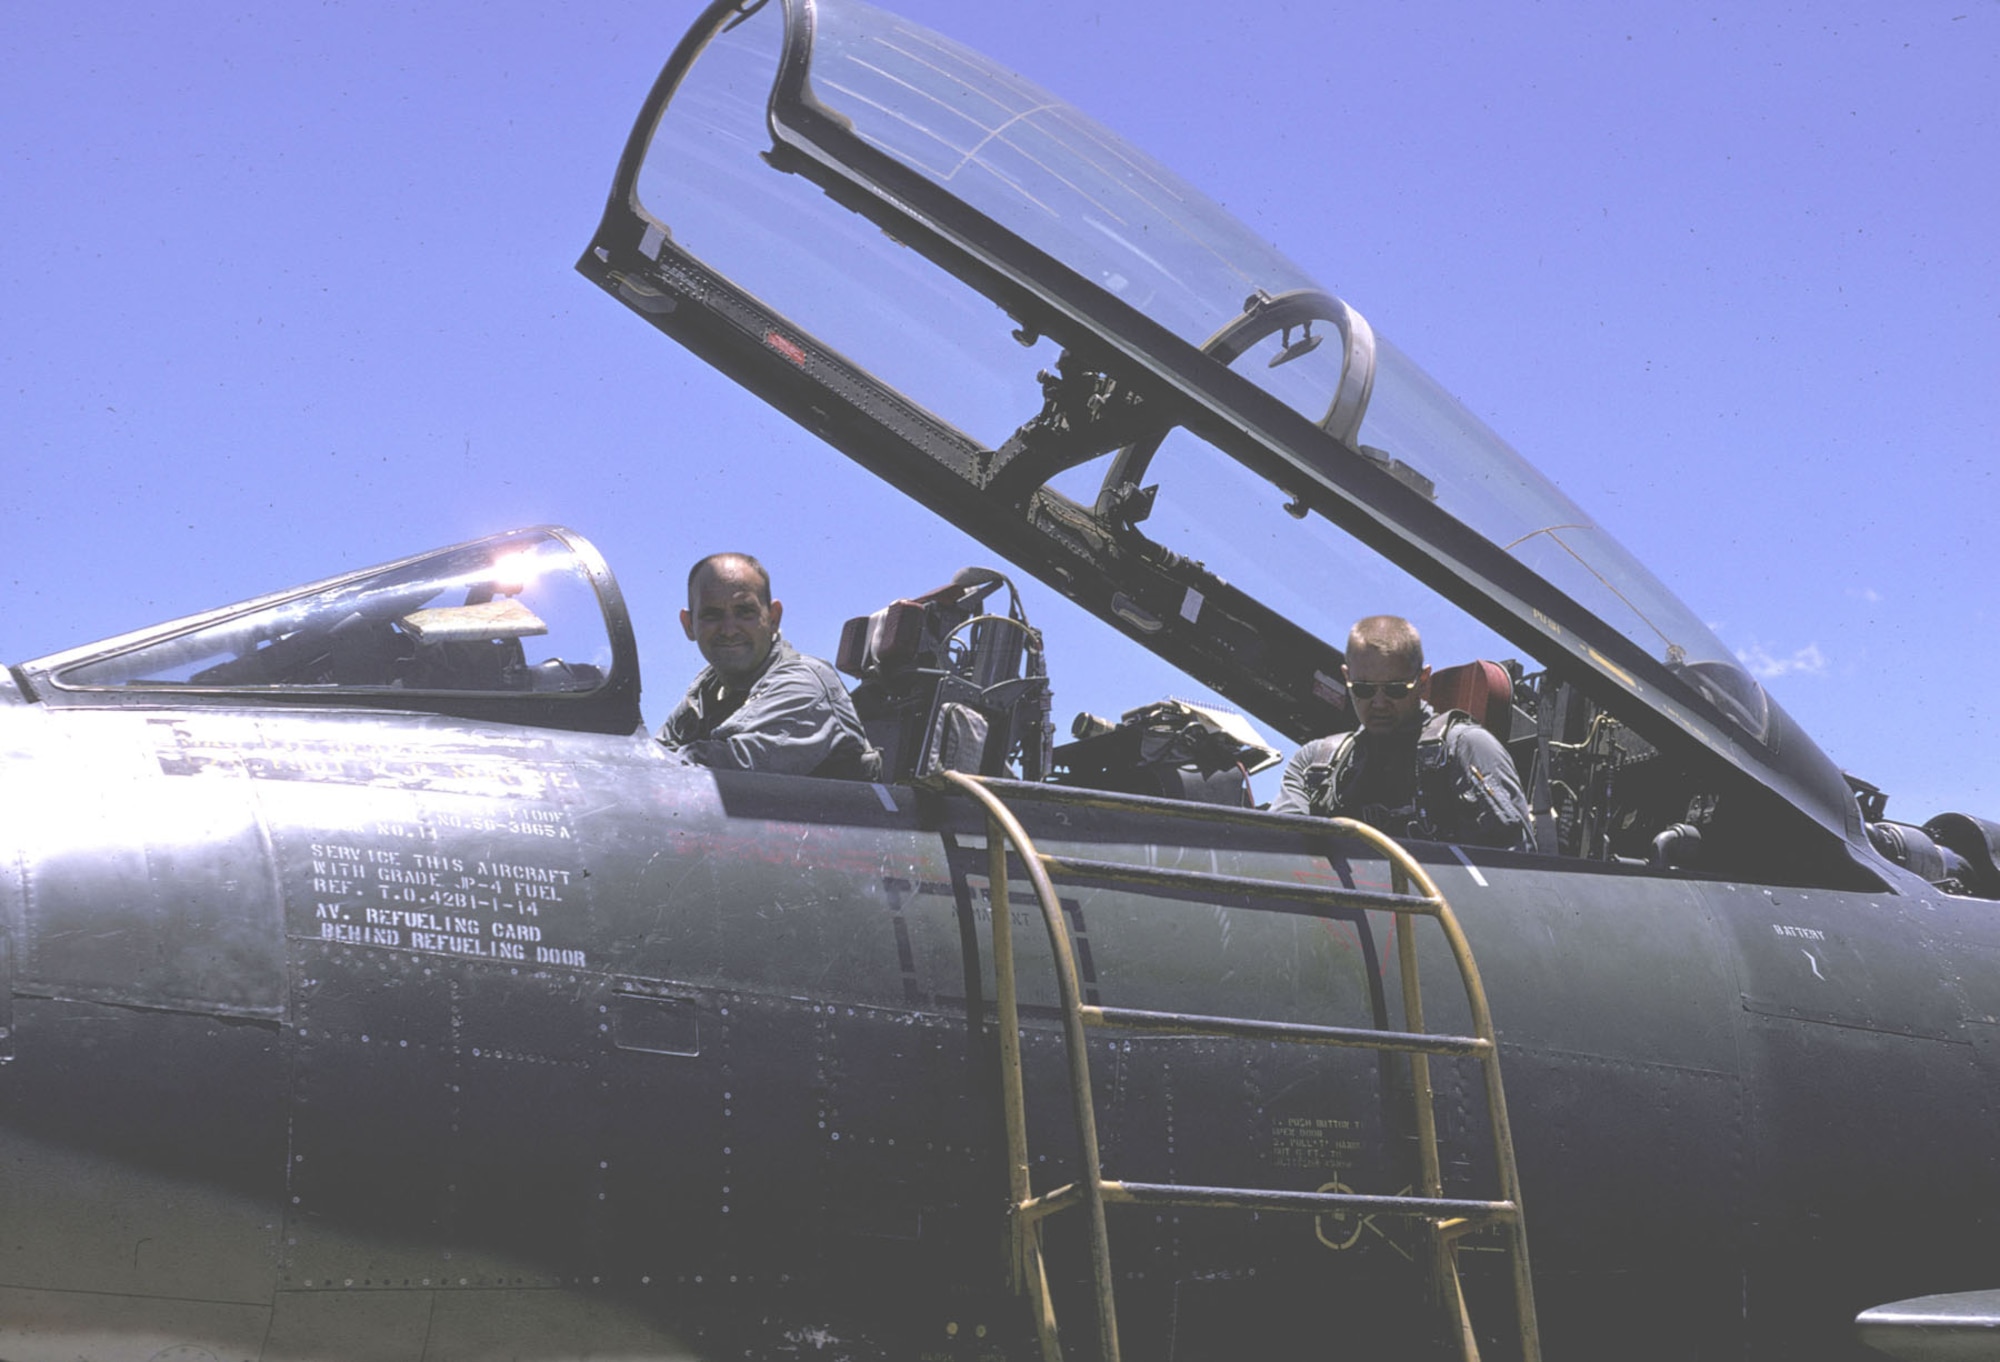 Both Misty FAC aircrewmen were fully qualified fighter pilots. During a mission, the front-seater usually flew the aircraft while the back-seater navigated and observed. (U.S. Air Force photo)